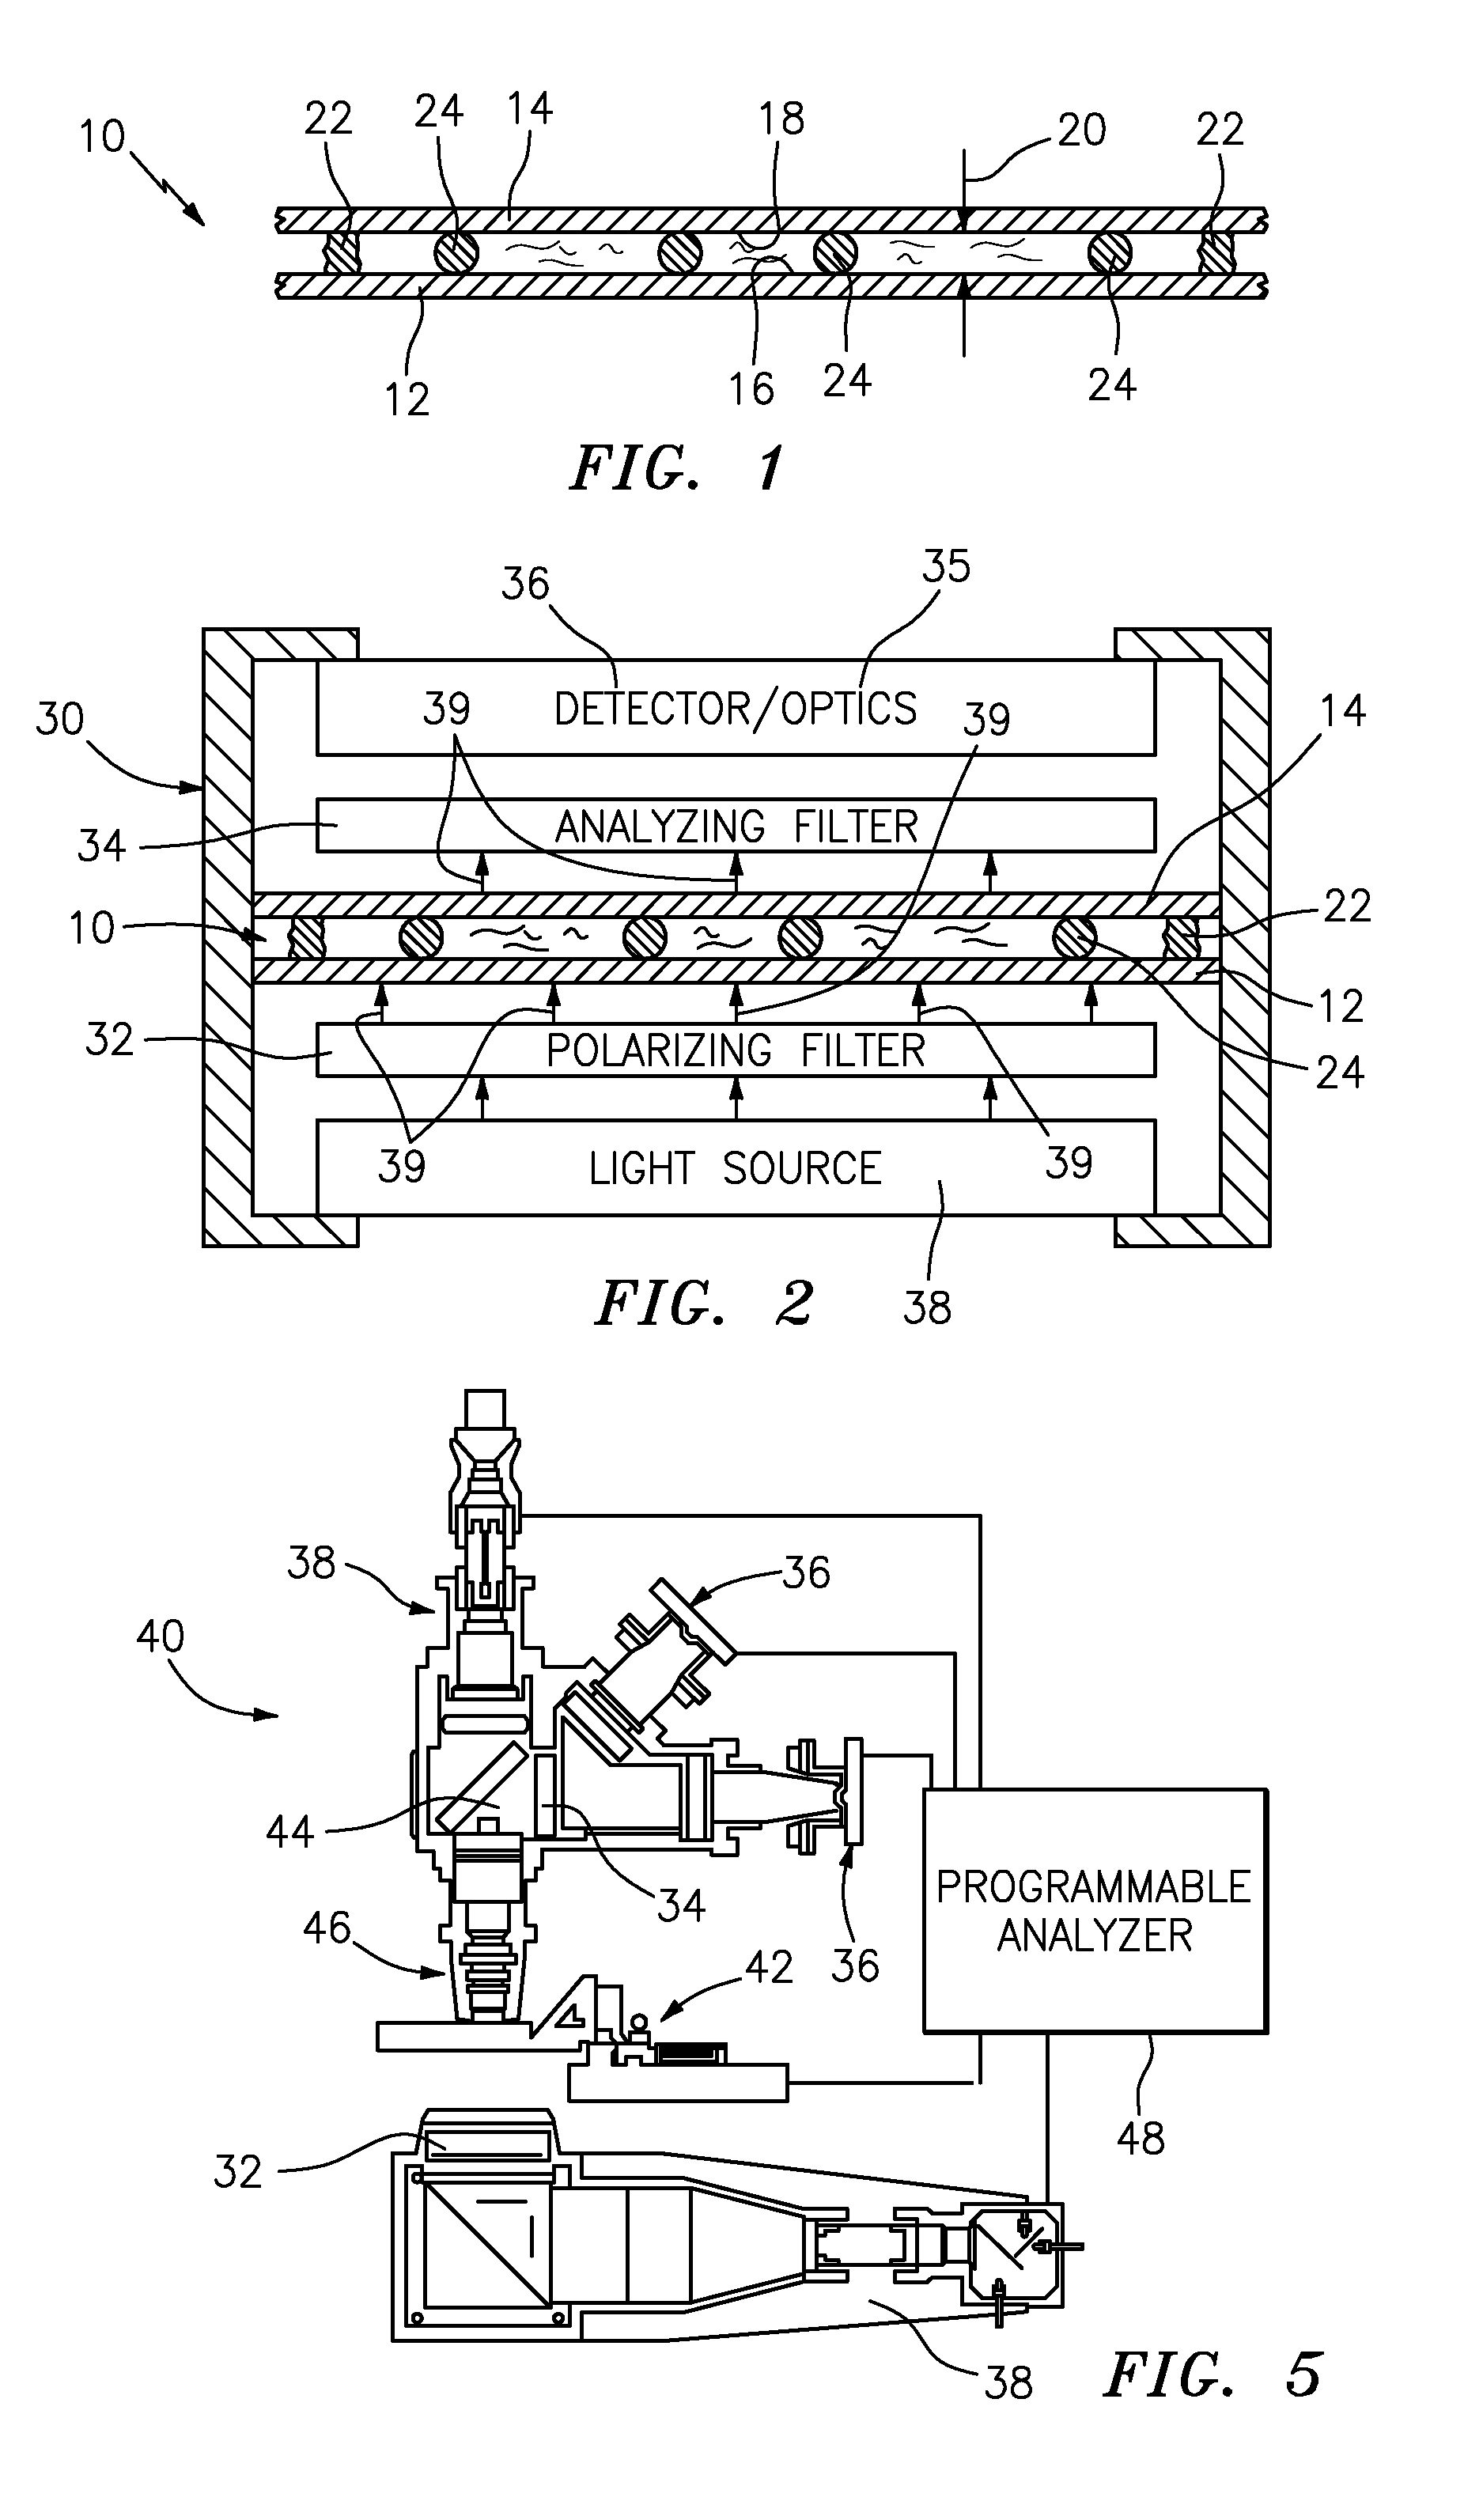 Method and apparatus for detecting the presence of anisotropic crystals and hemozoin producing parasites in liquid blood